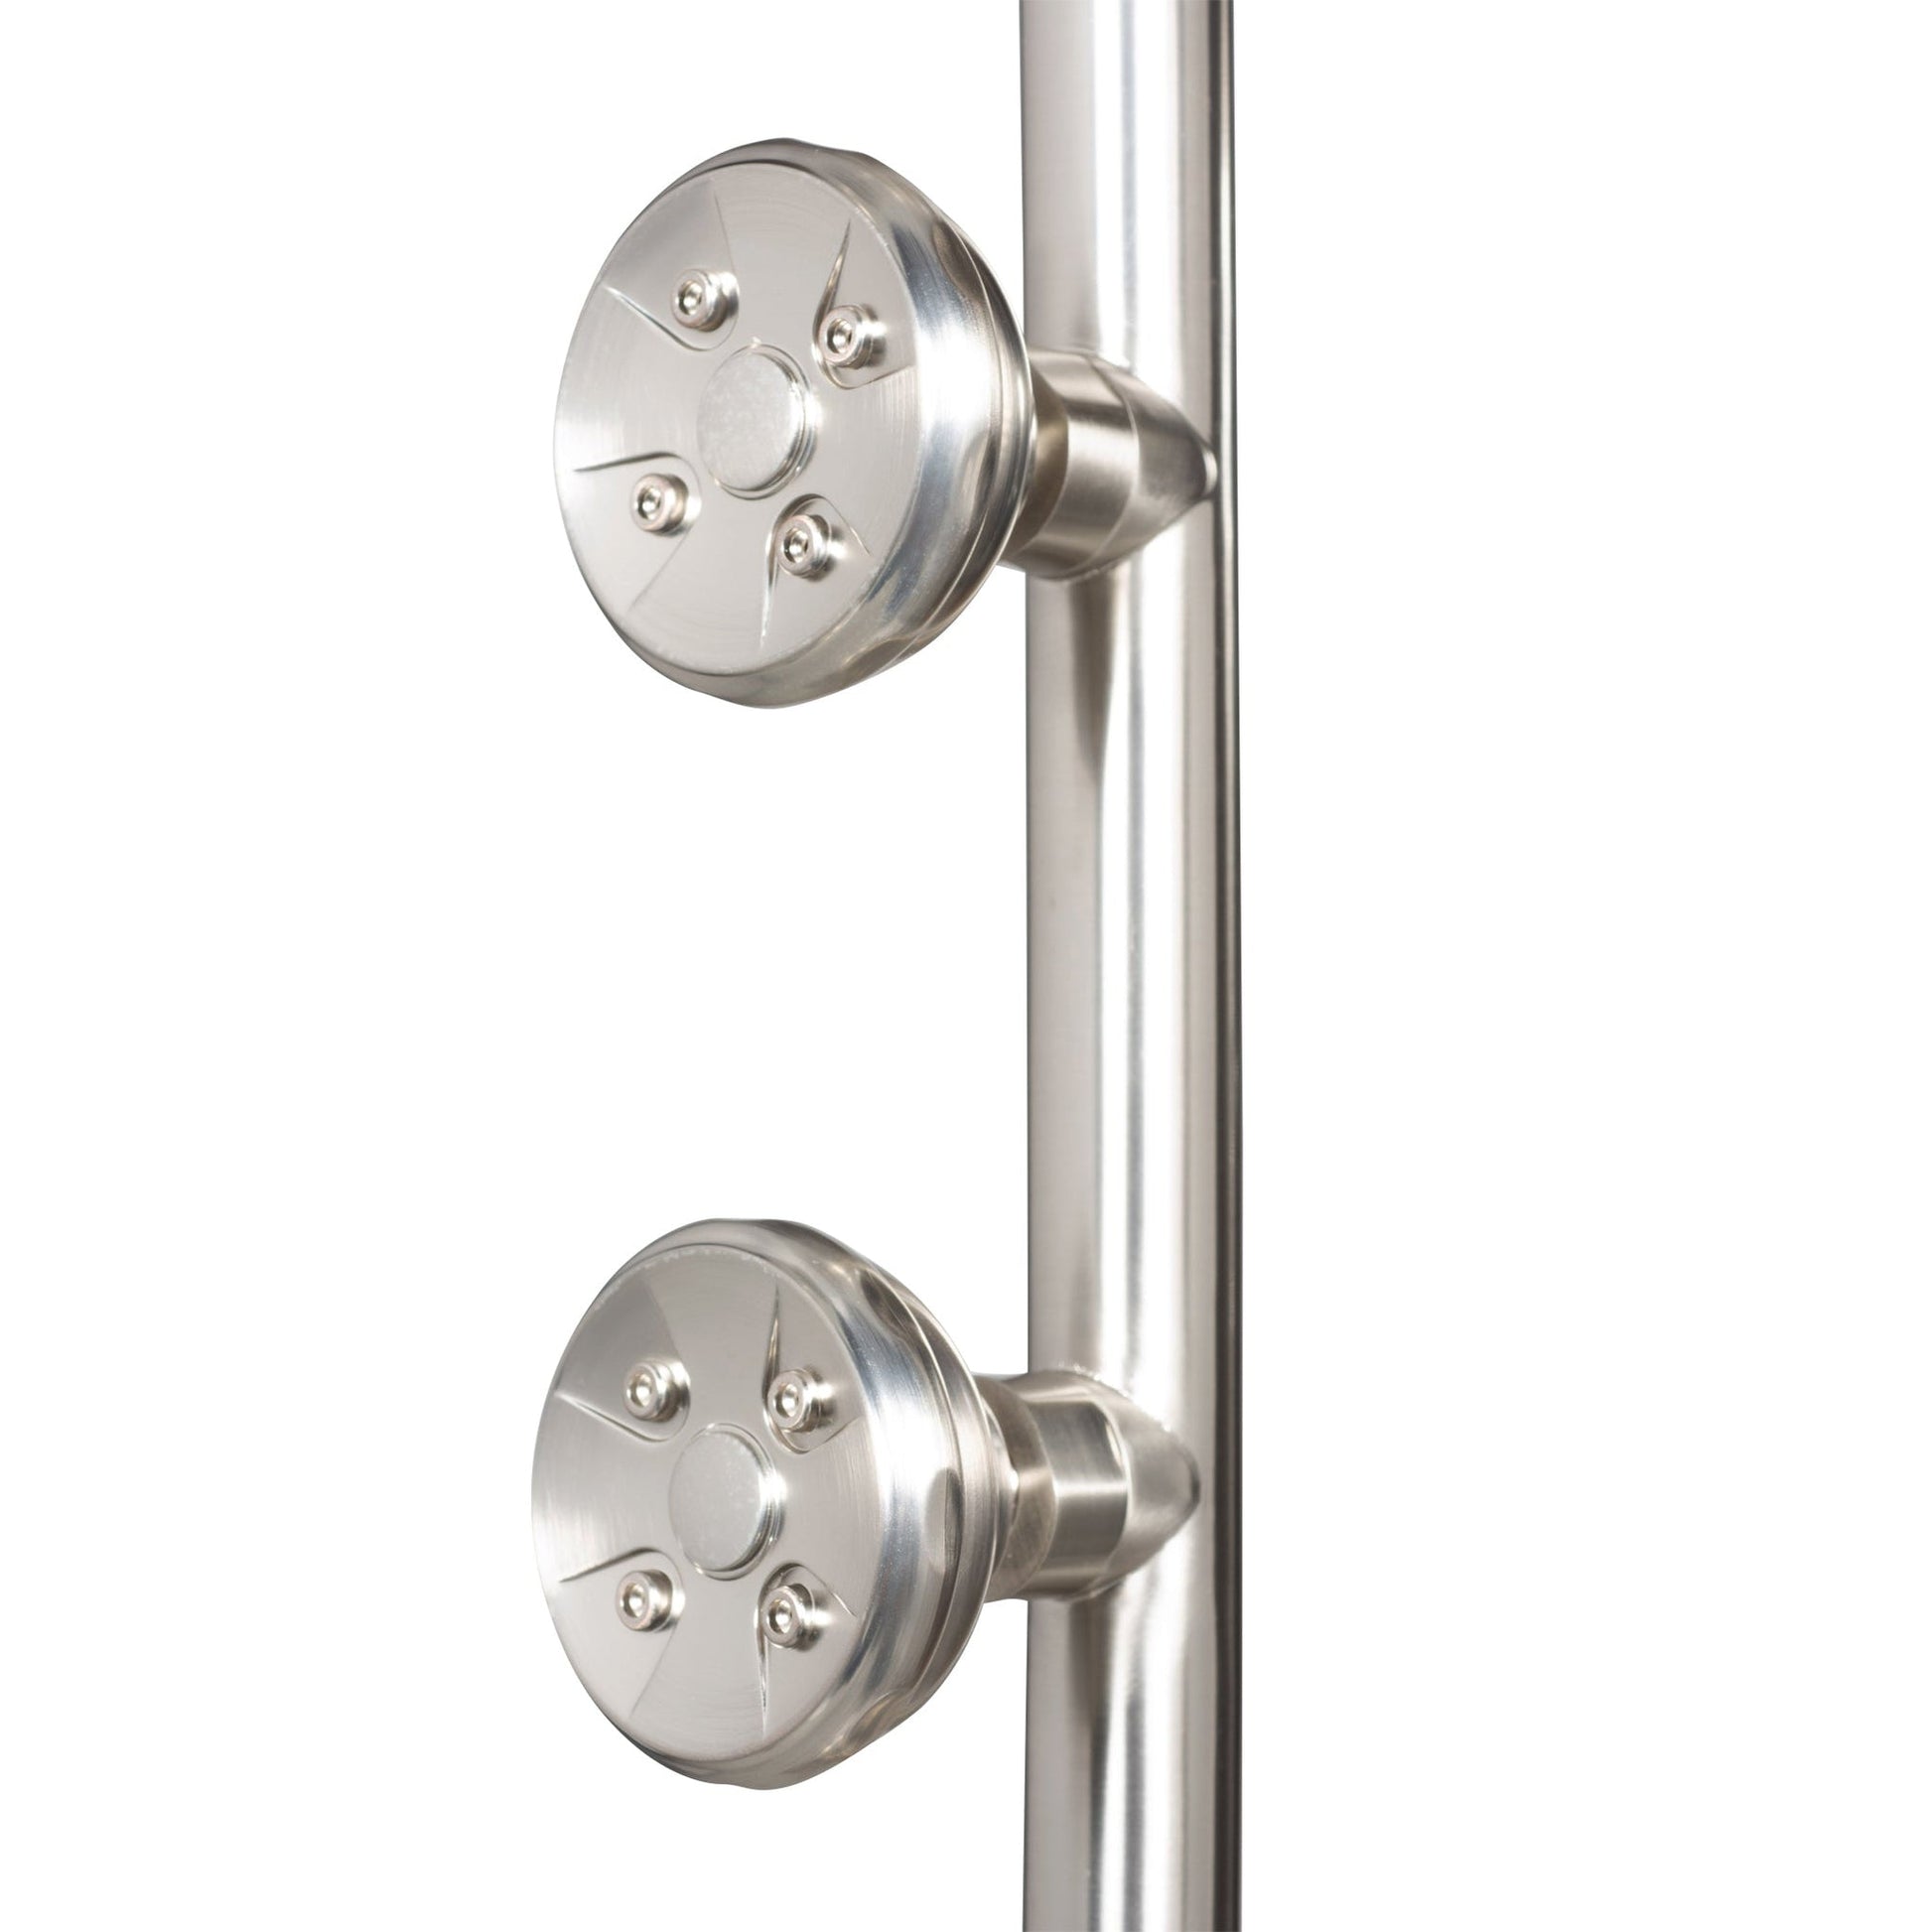 PULSE ShowerSpas Lanai 1.8 GPM Rain Shower System in Brushed Nickel Finish With 3-Power Spray Body Jet and 3-Function Hand Shower